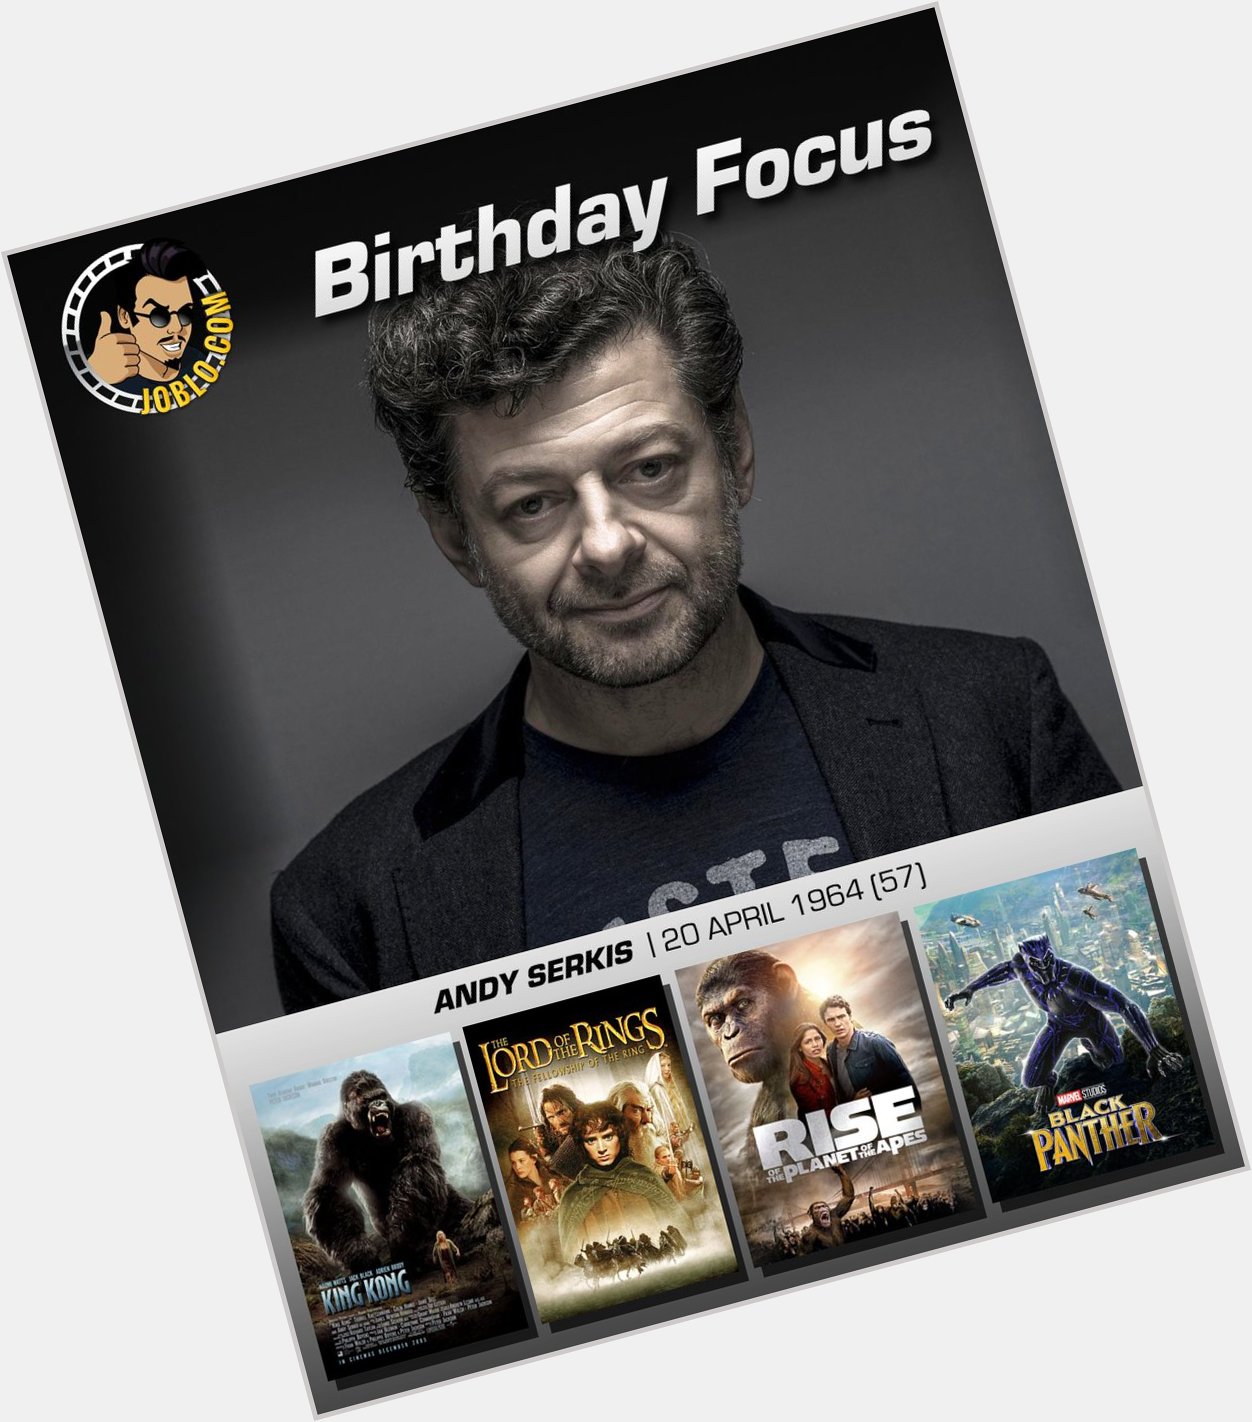 Wishing the great Andy Serkis a very happy 57th birthday! 